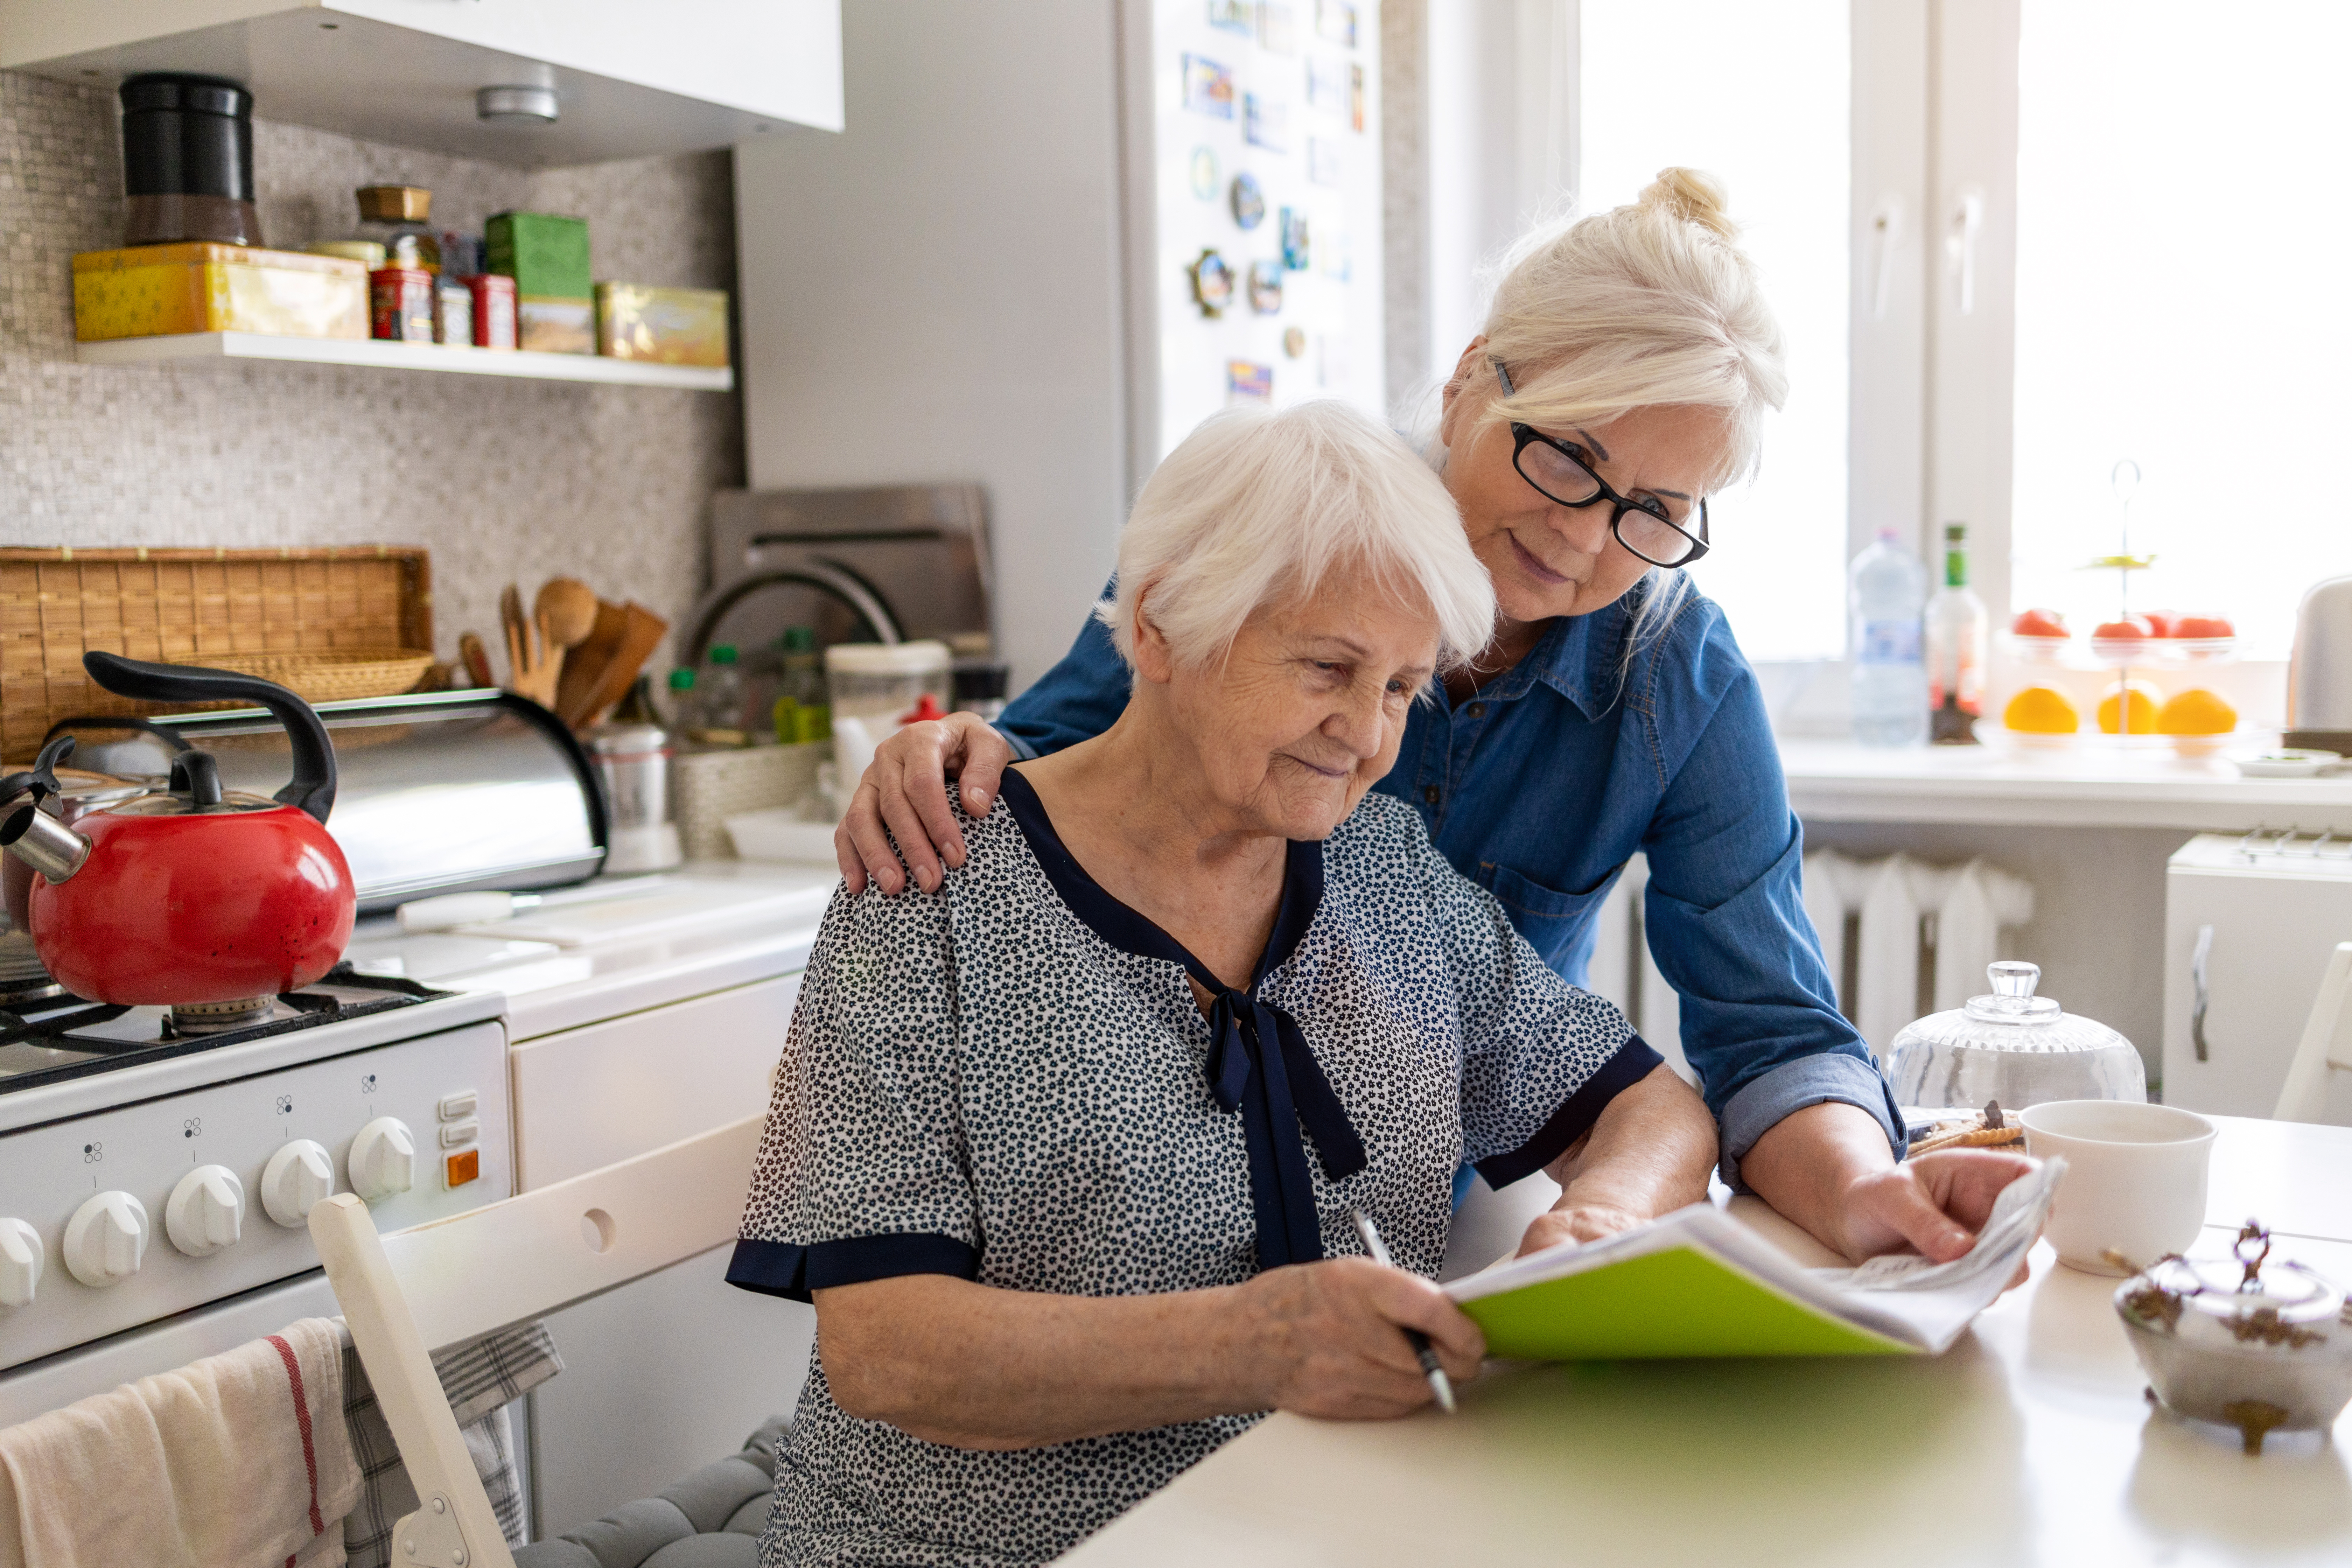 Is Home Health Good for Dementia Patients?